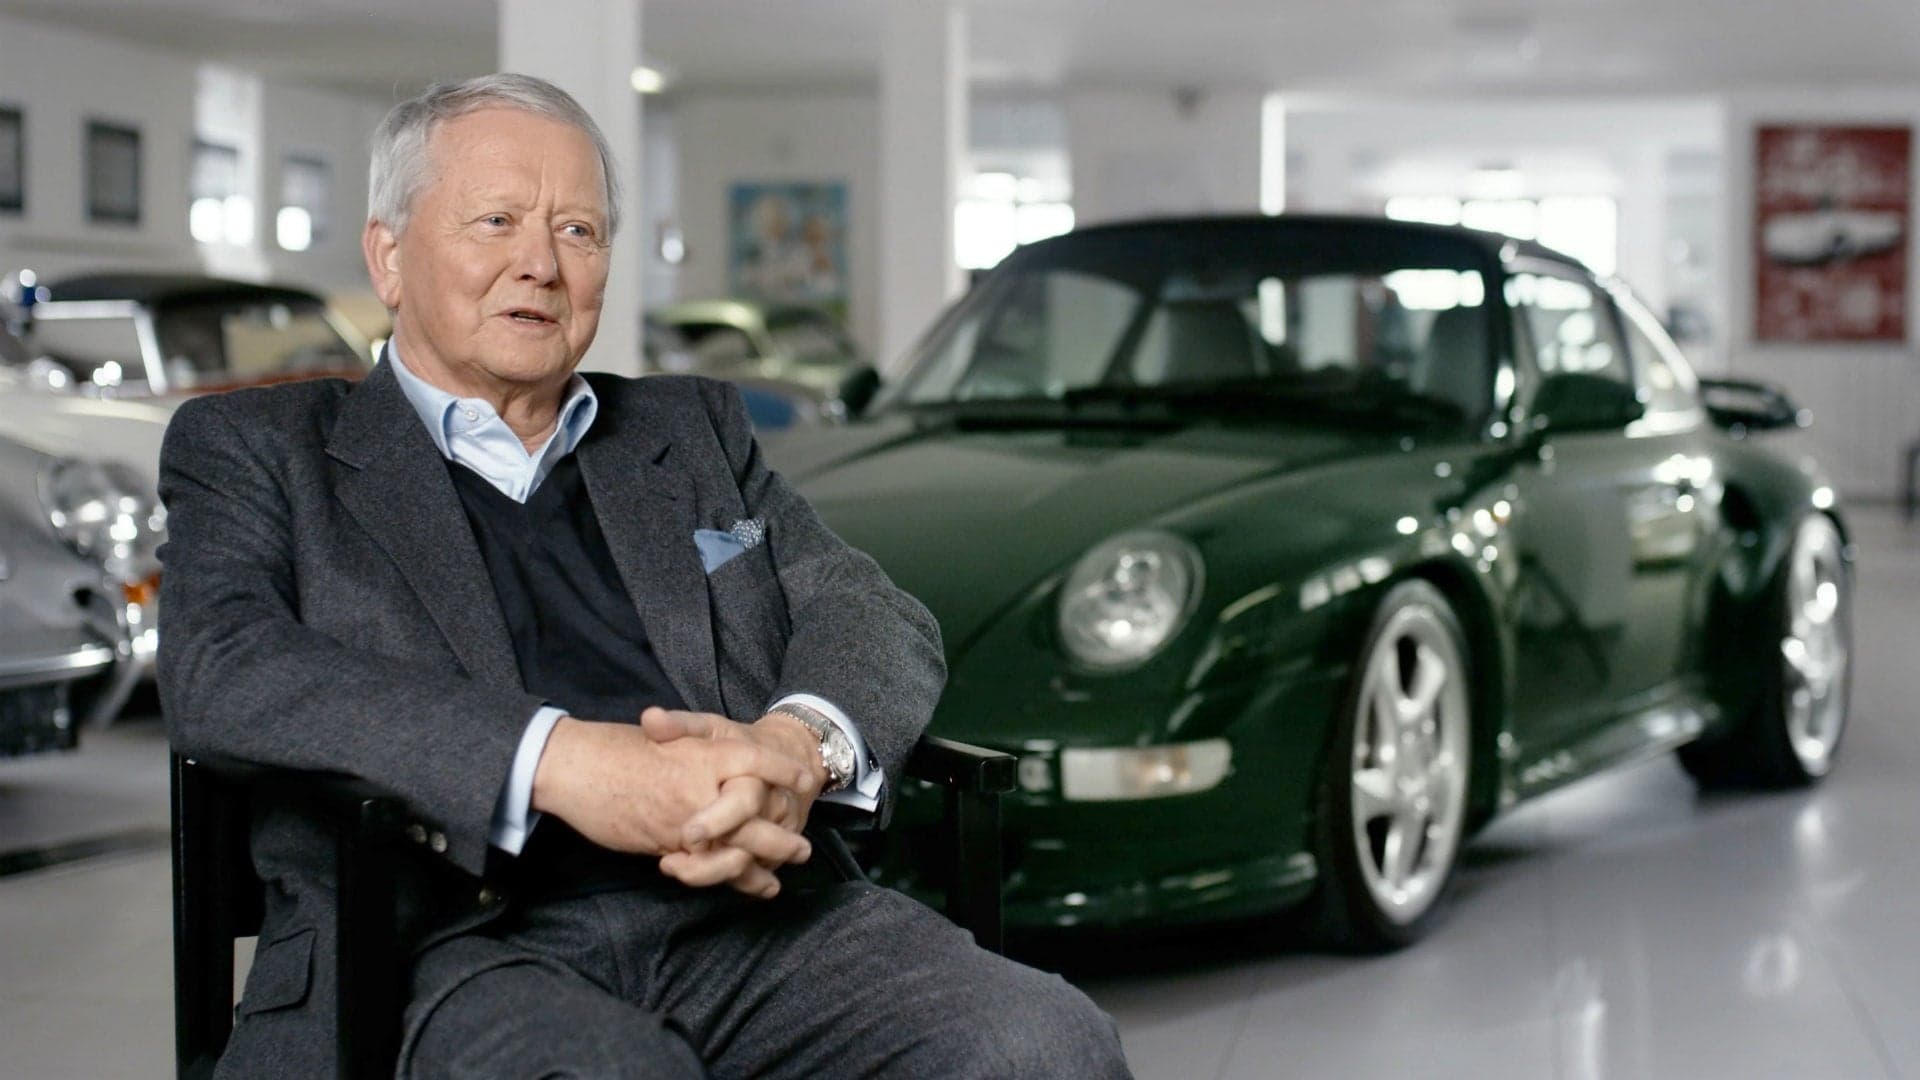 Take a Look at the Highlights from Dr. Wolfgang Porsche’s Extensive Car Collection